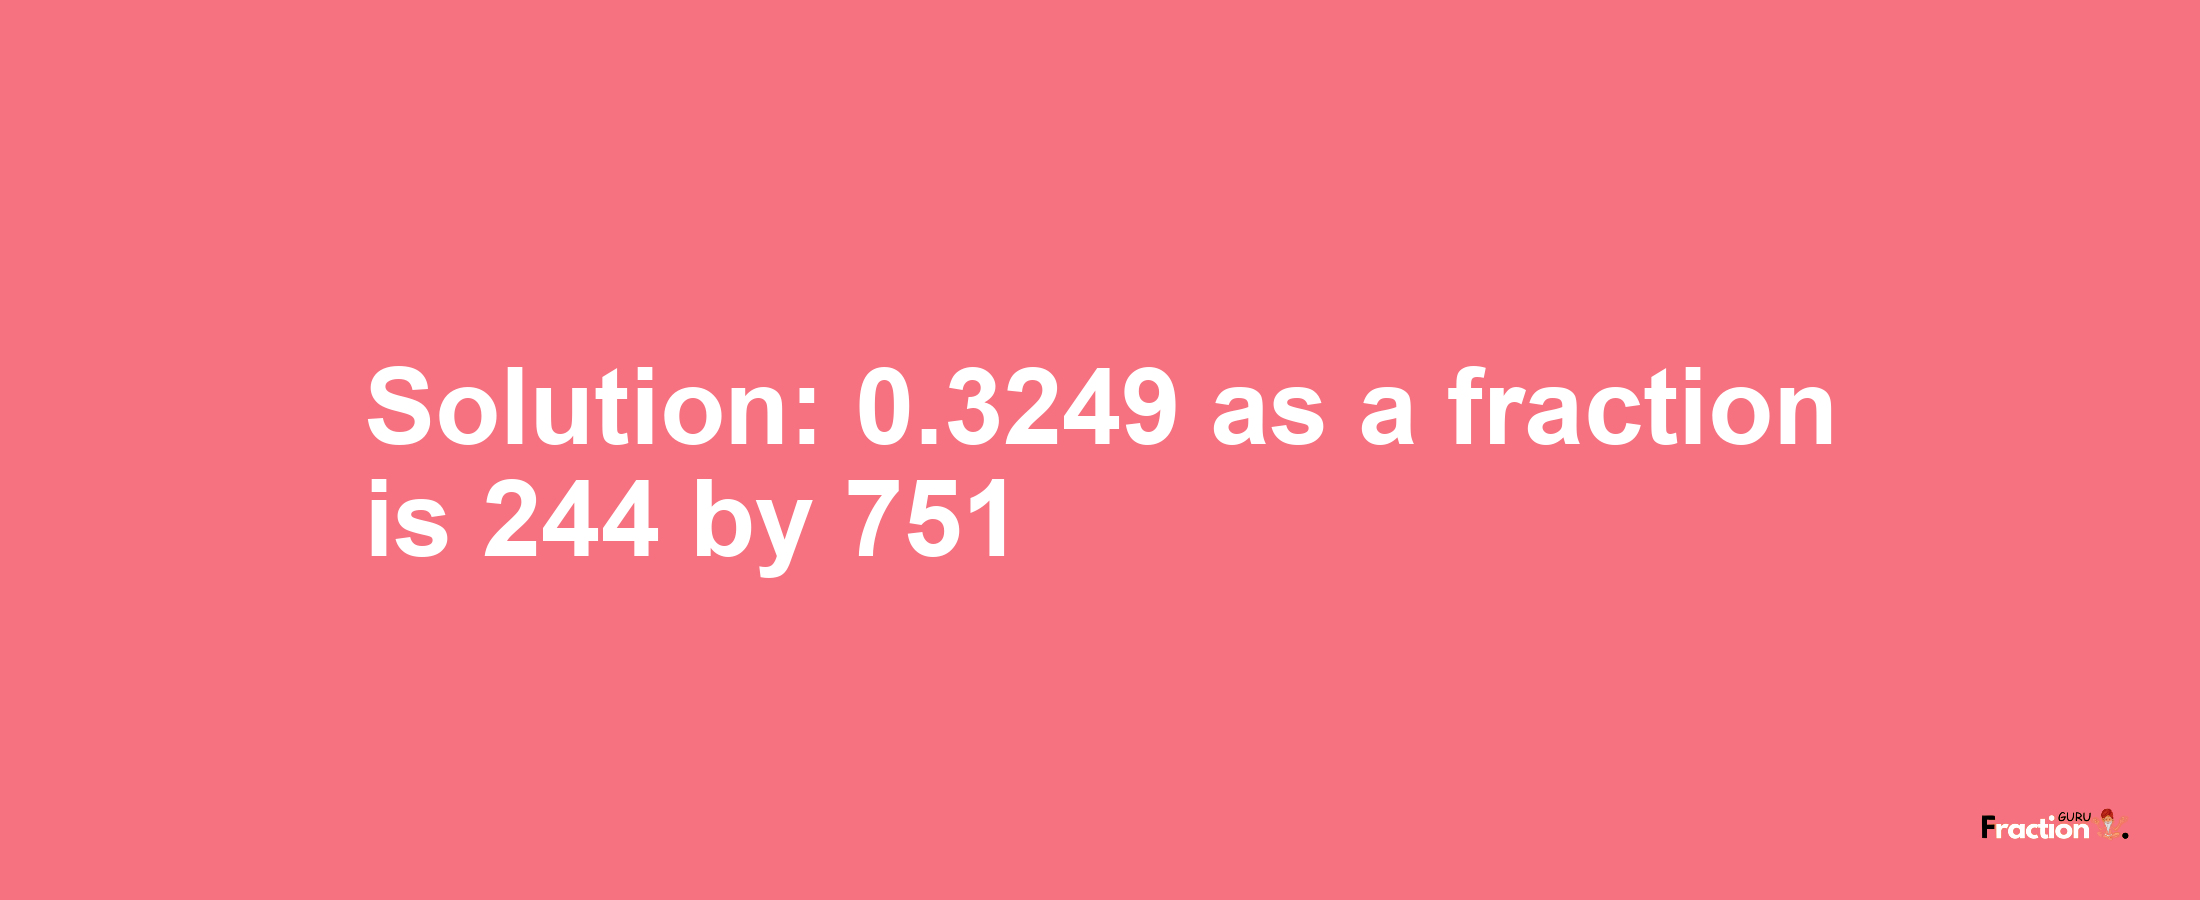 Solution:0.3249 as a fraction is 244/751